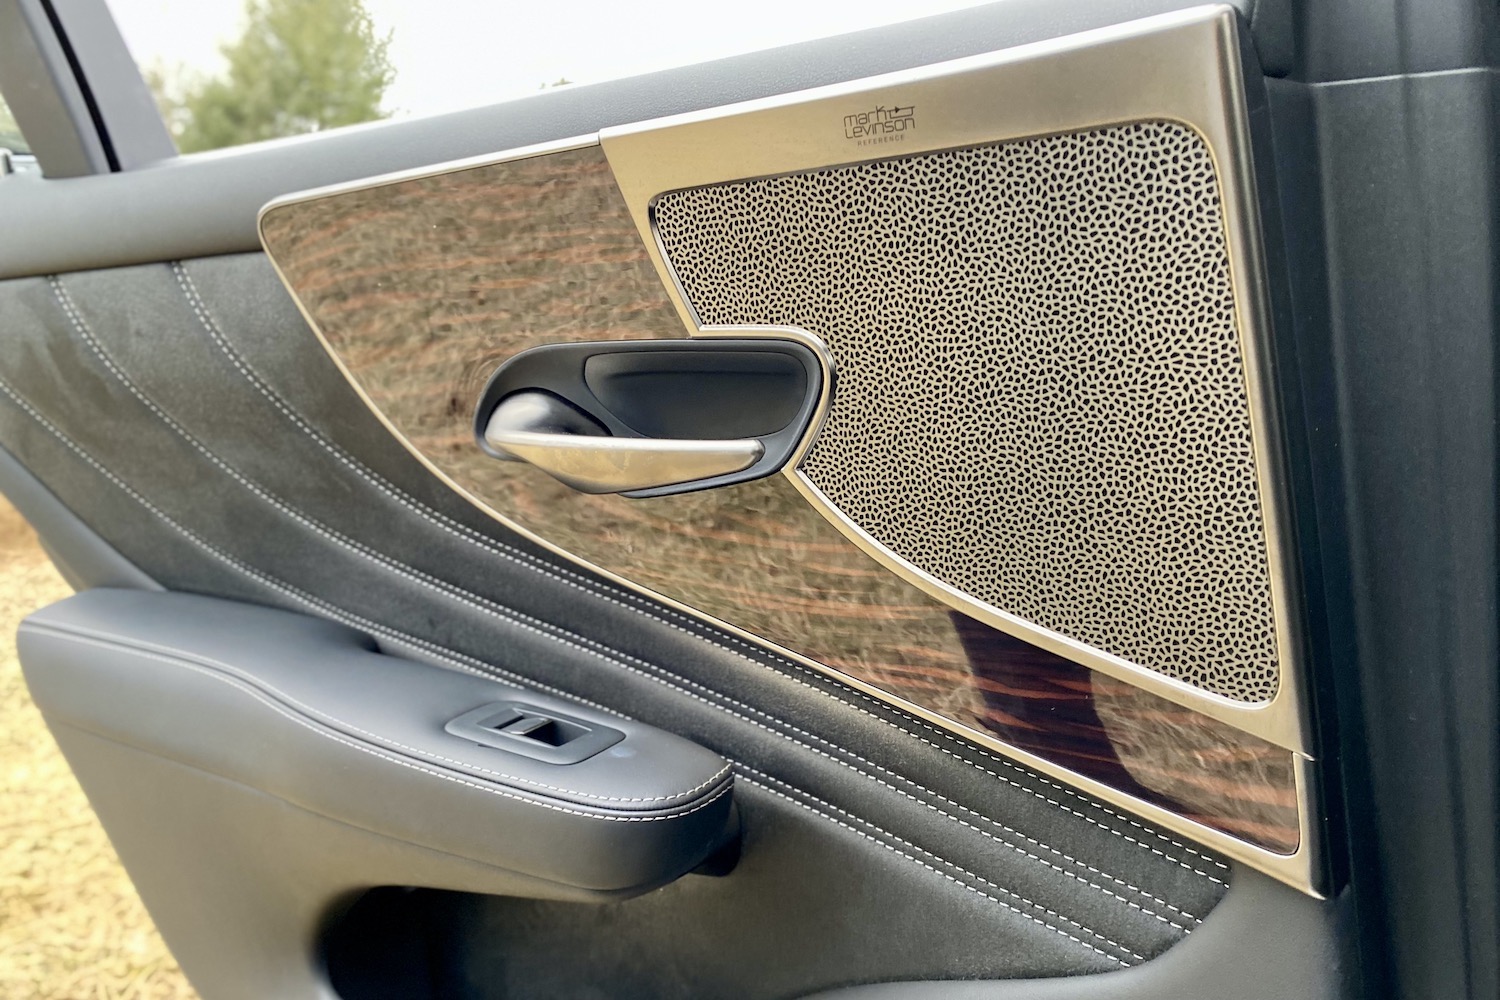 A close-up of the trim and speakers in the 2021 Lexus LS500.